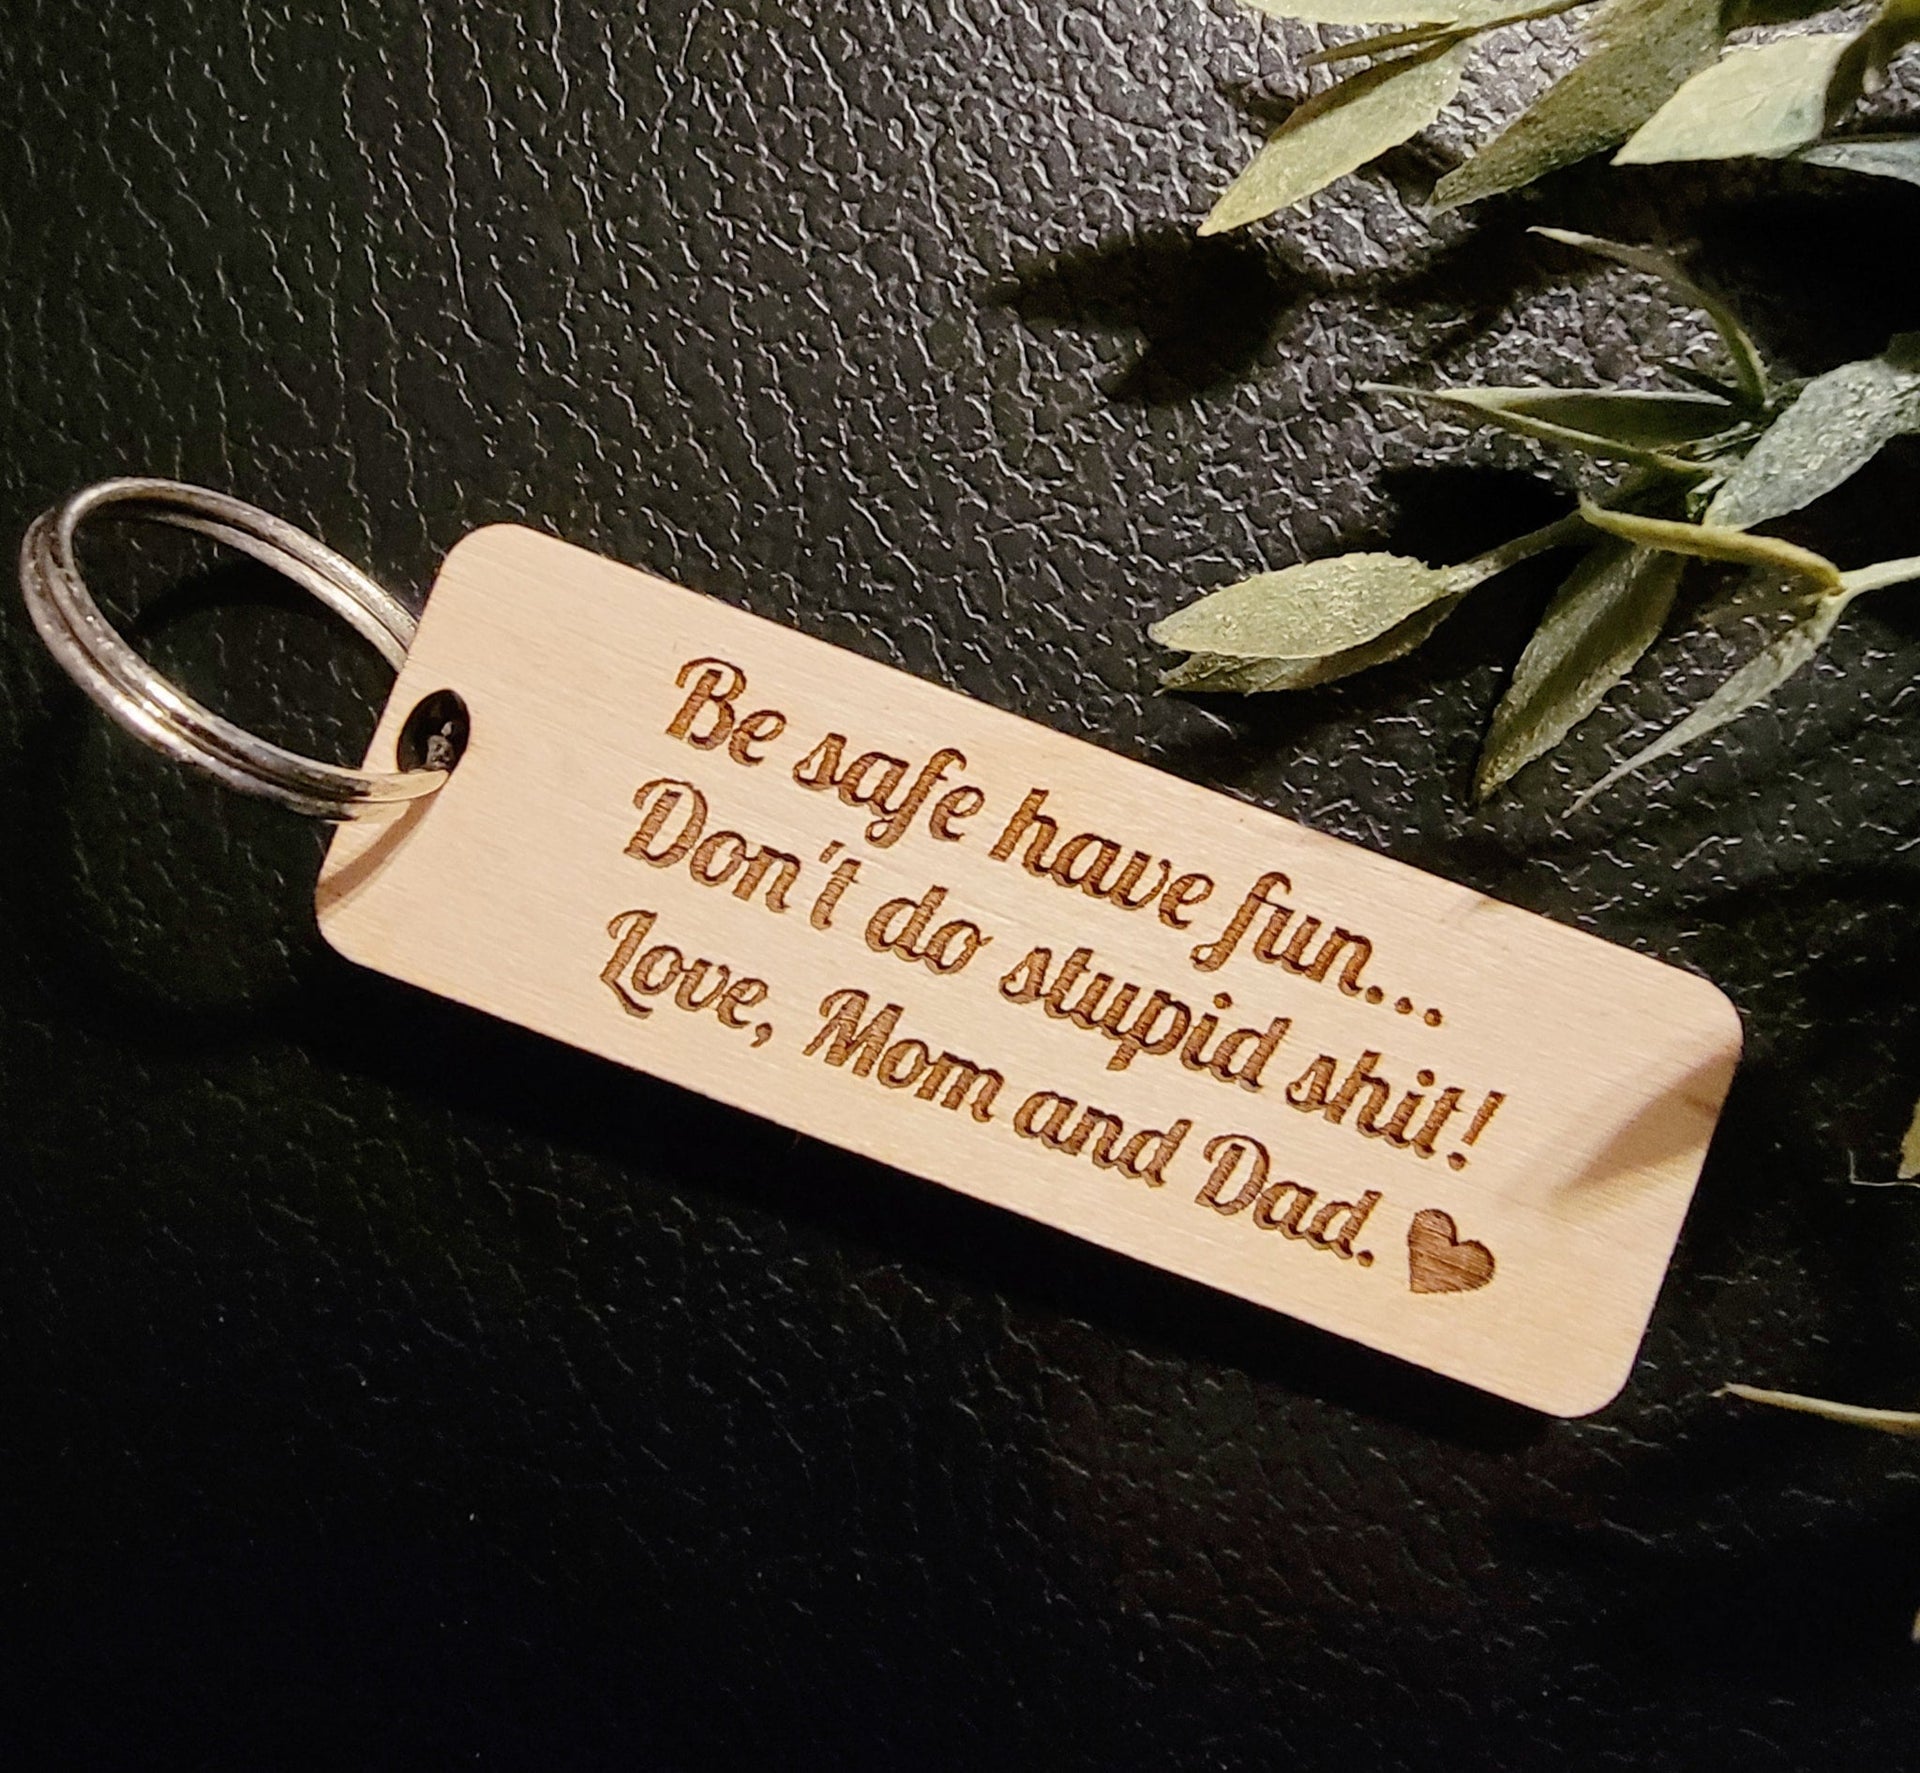 Be Safe Have Fun Don't Do Stupid Shit Love Mom & Dad Keychain, 1st Car –  Candidly K Handmade